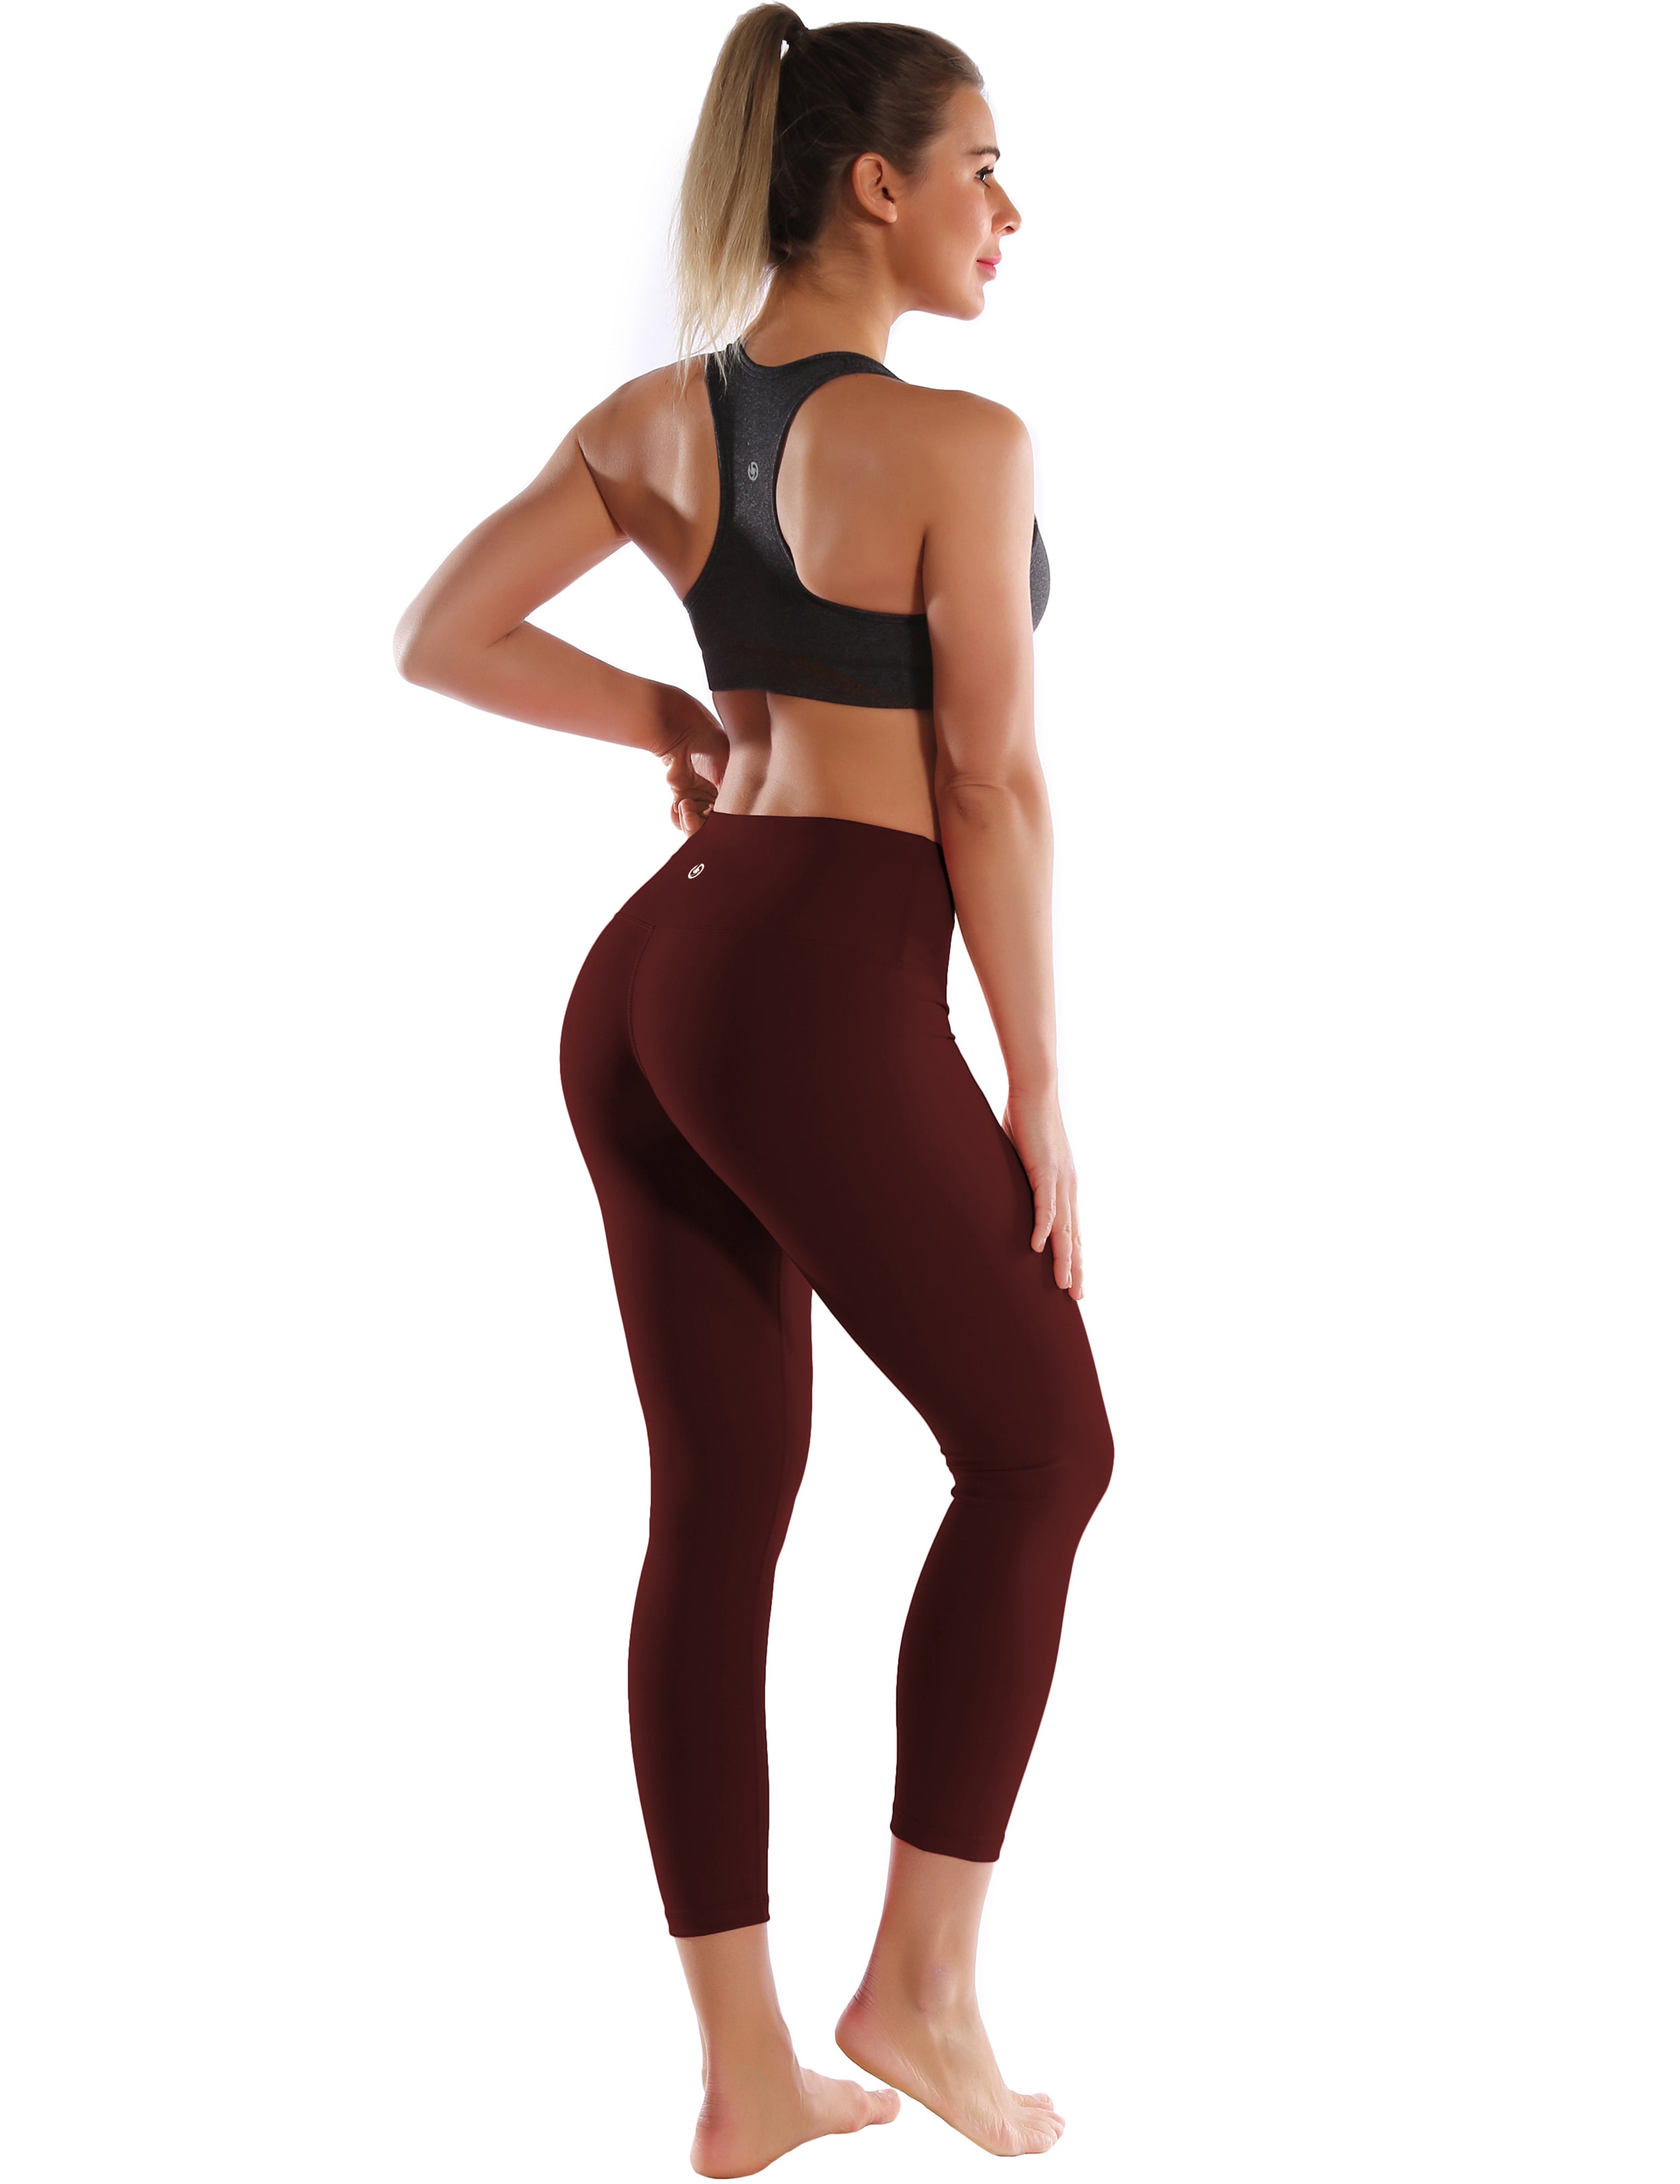 22" High Waist Crop Tight Capris mahoganymaroon 75%Nylon/25%Spandex Fabric doesn't attract lint easily 4-way stretch No see-through Moisture-wicking Tummy control Inner pocket